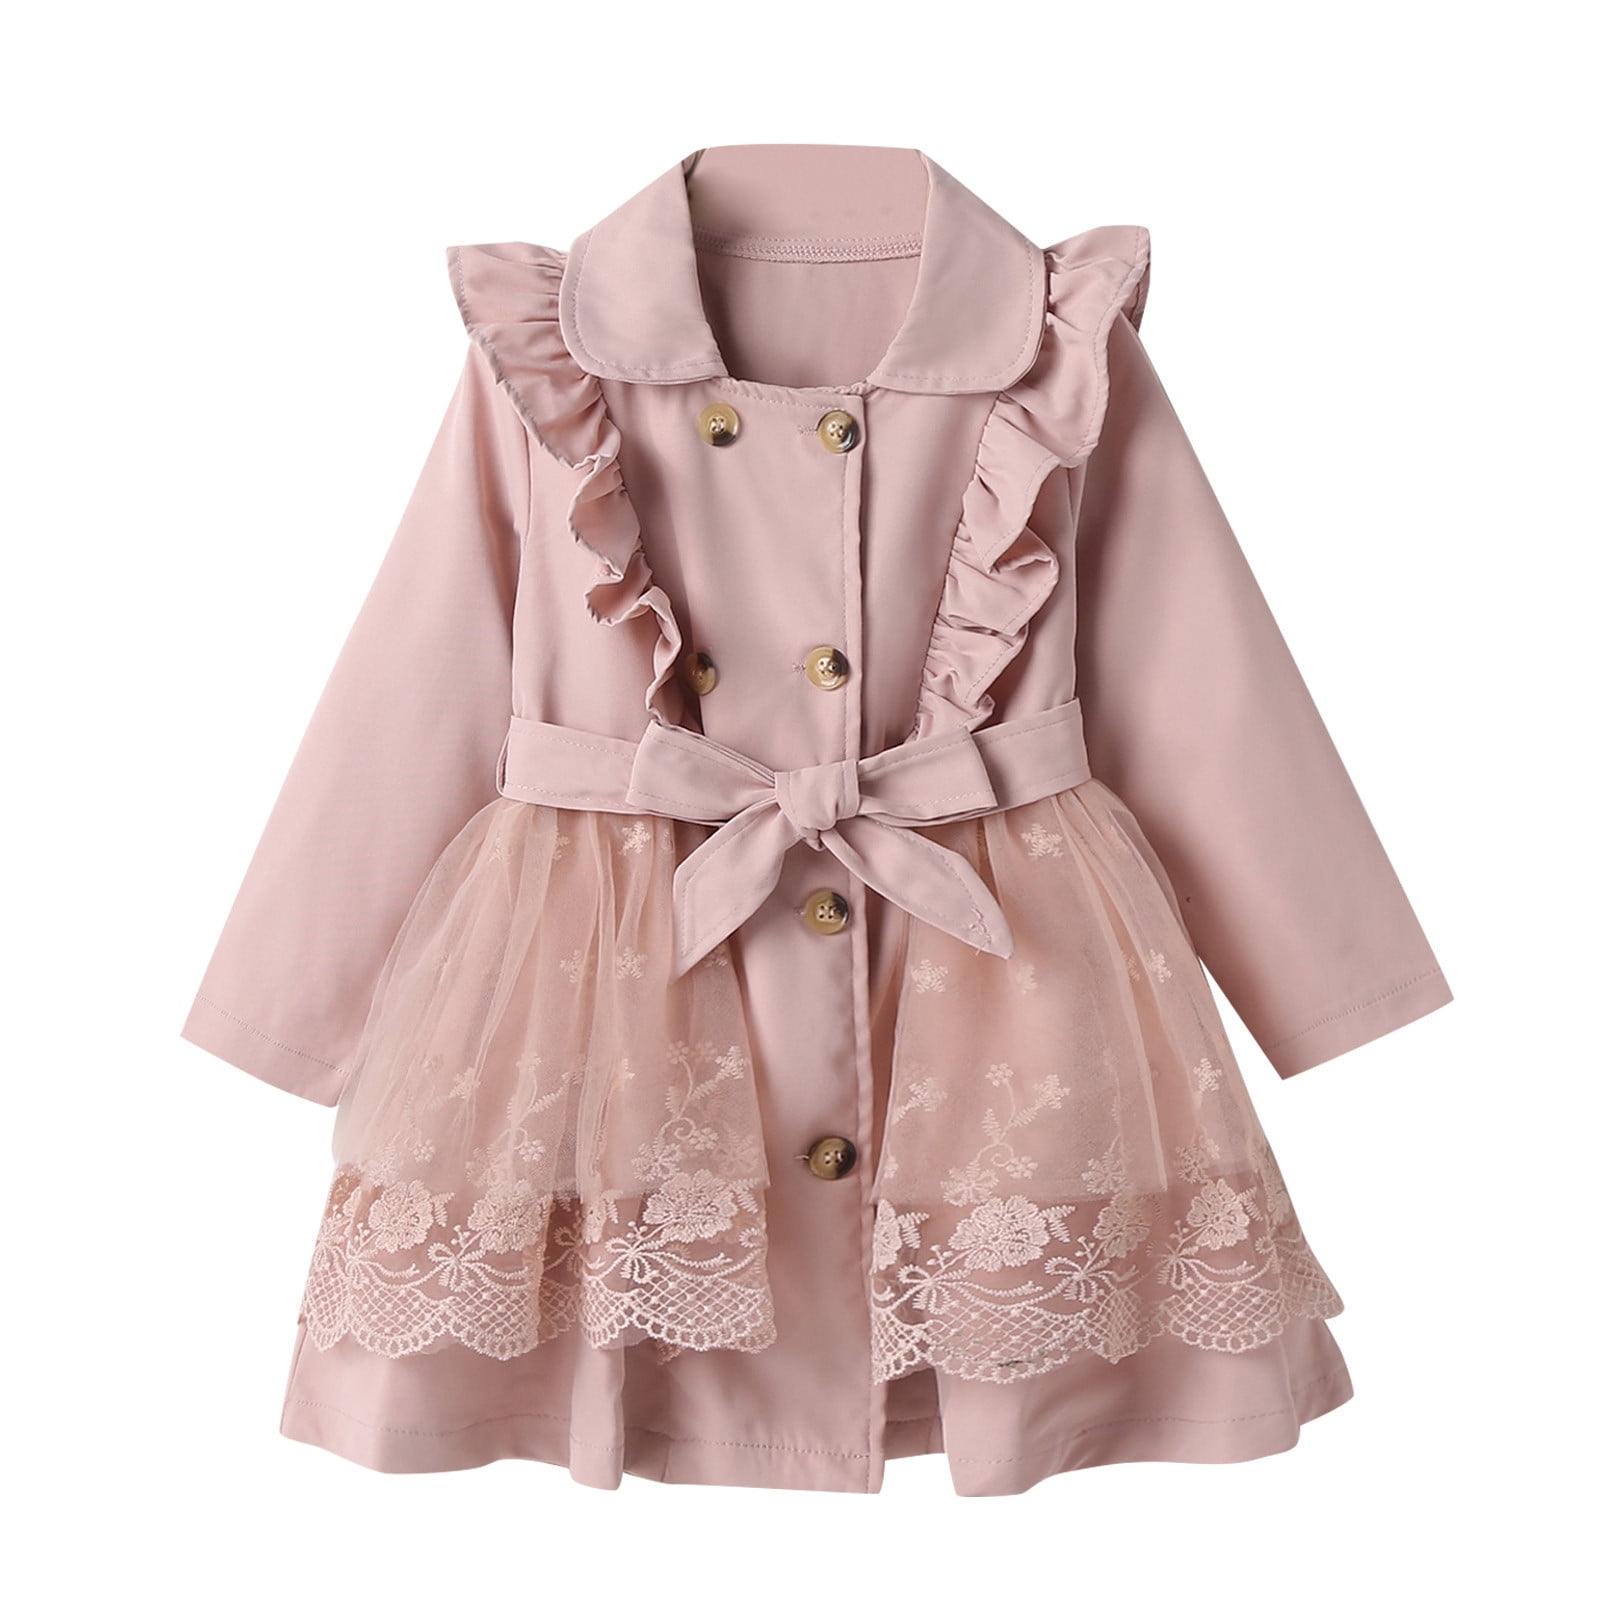 WOXINDA Toddler Child Kids Baby Girls Solid Patchwork Tulle Bowknot Rain  Jacket Winter Coats Outer Outfits Clothes